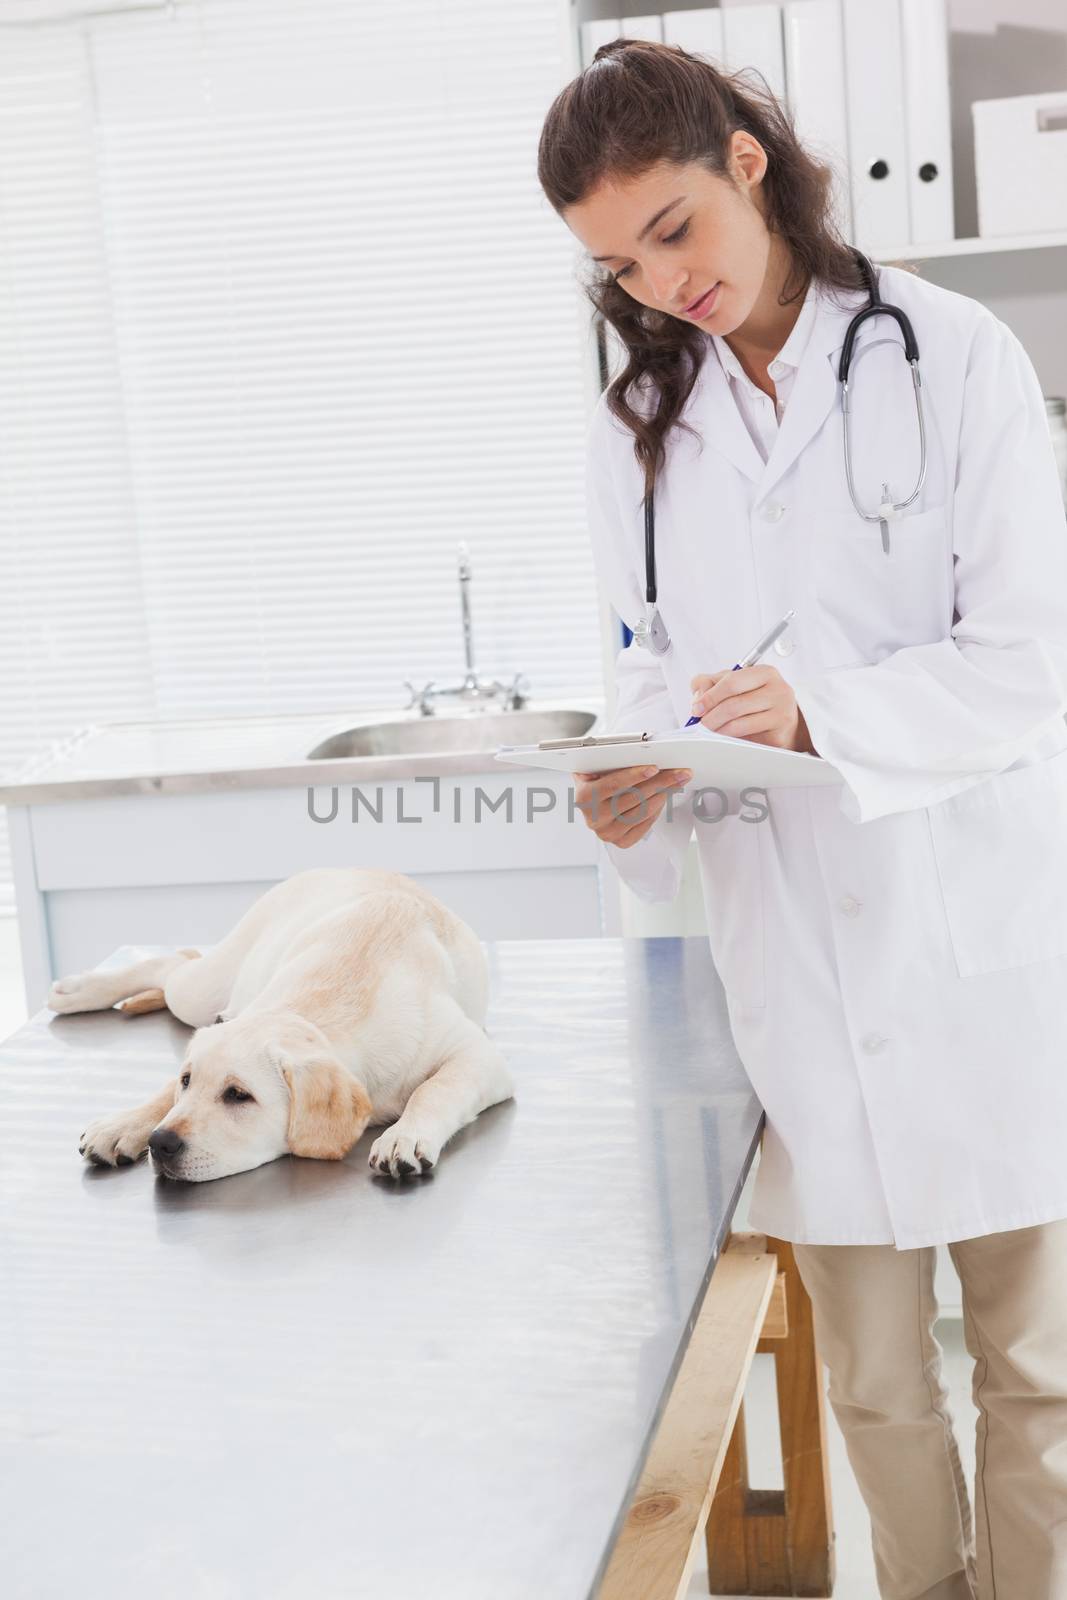 Vet examining a dog and writing on clipboard by Wavebreakmedia